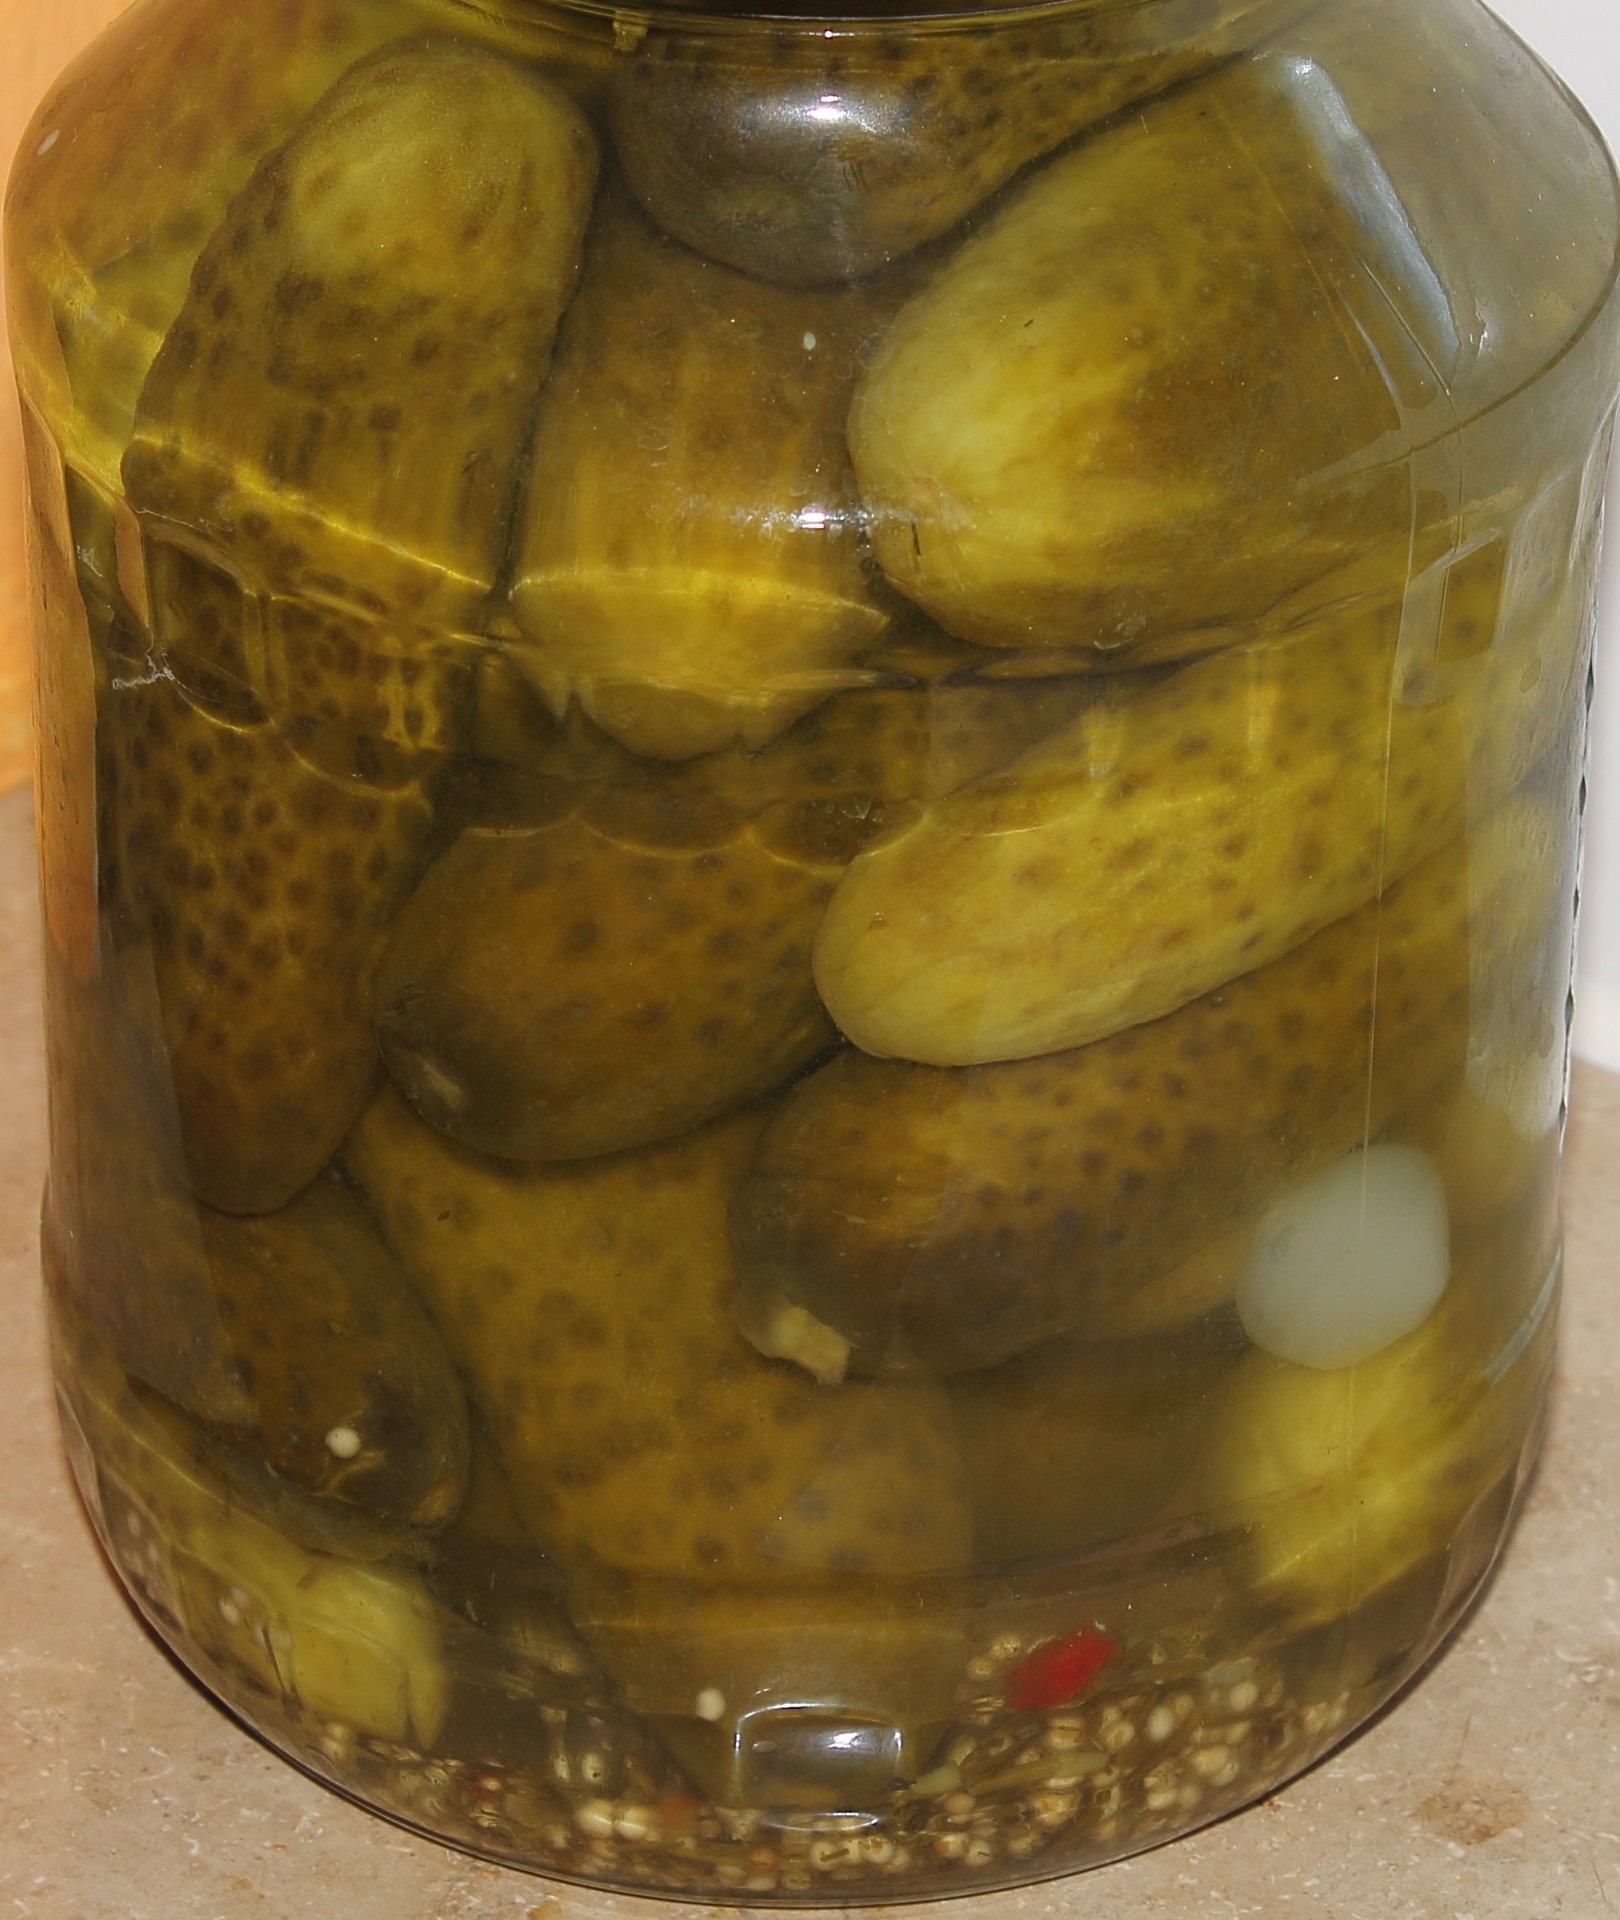 pickles spice cucumbers free photo